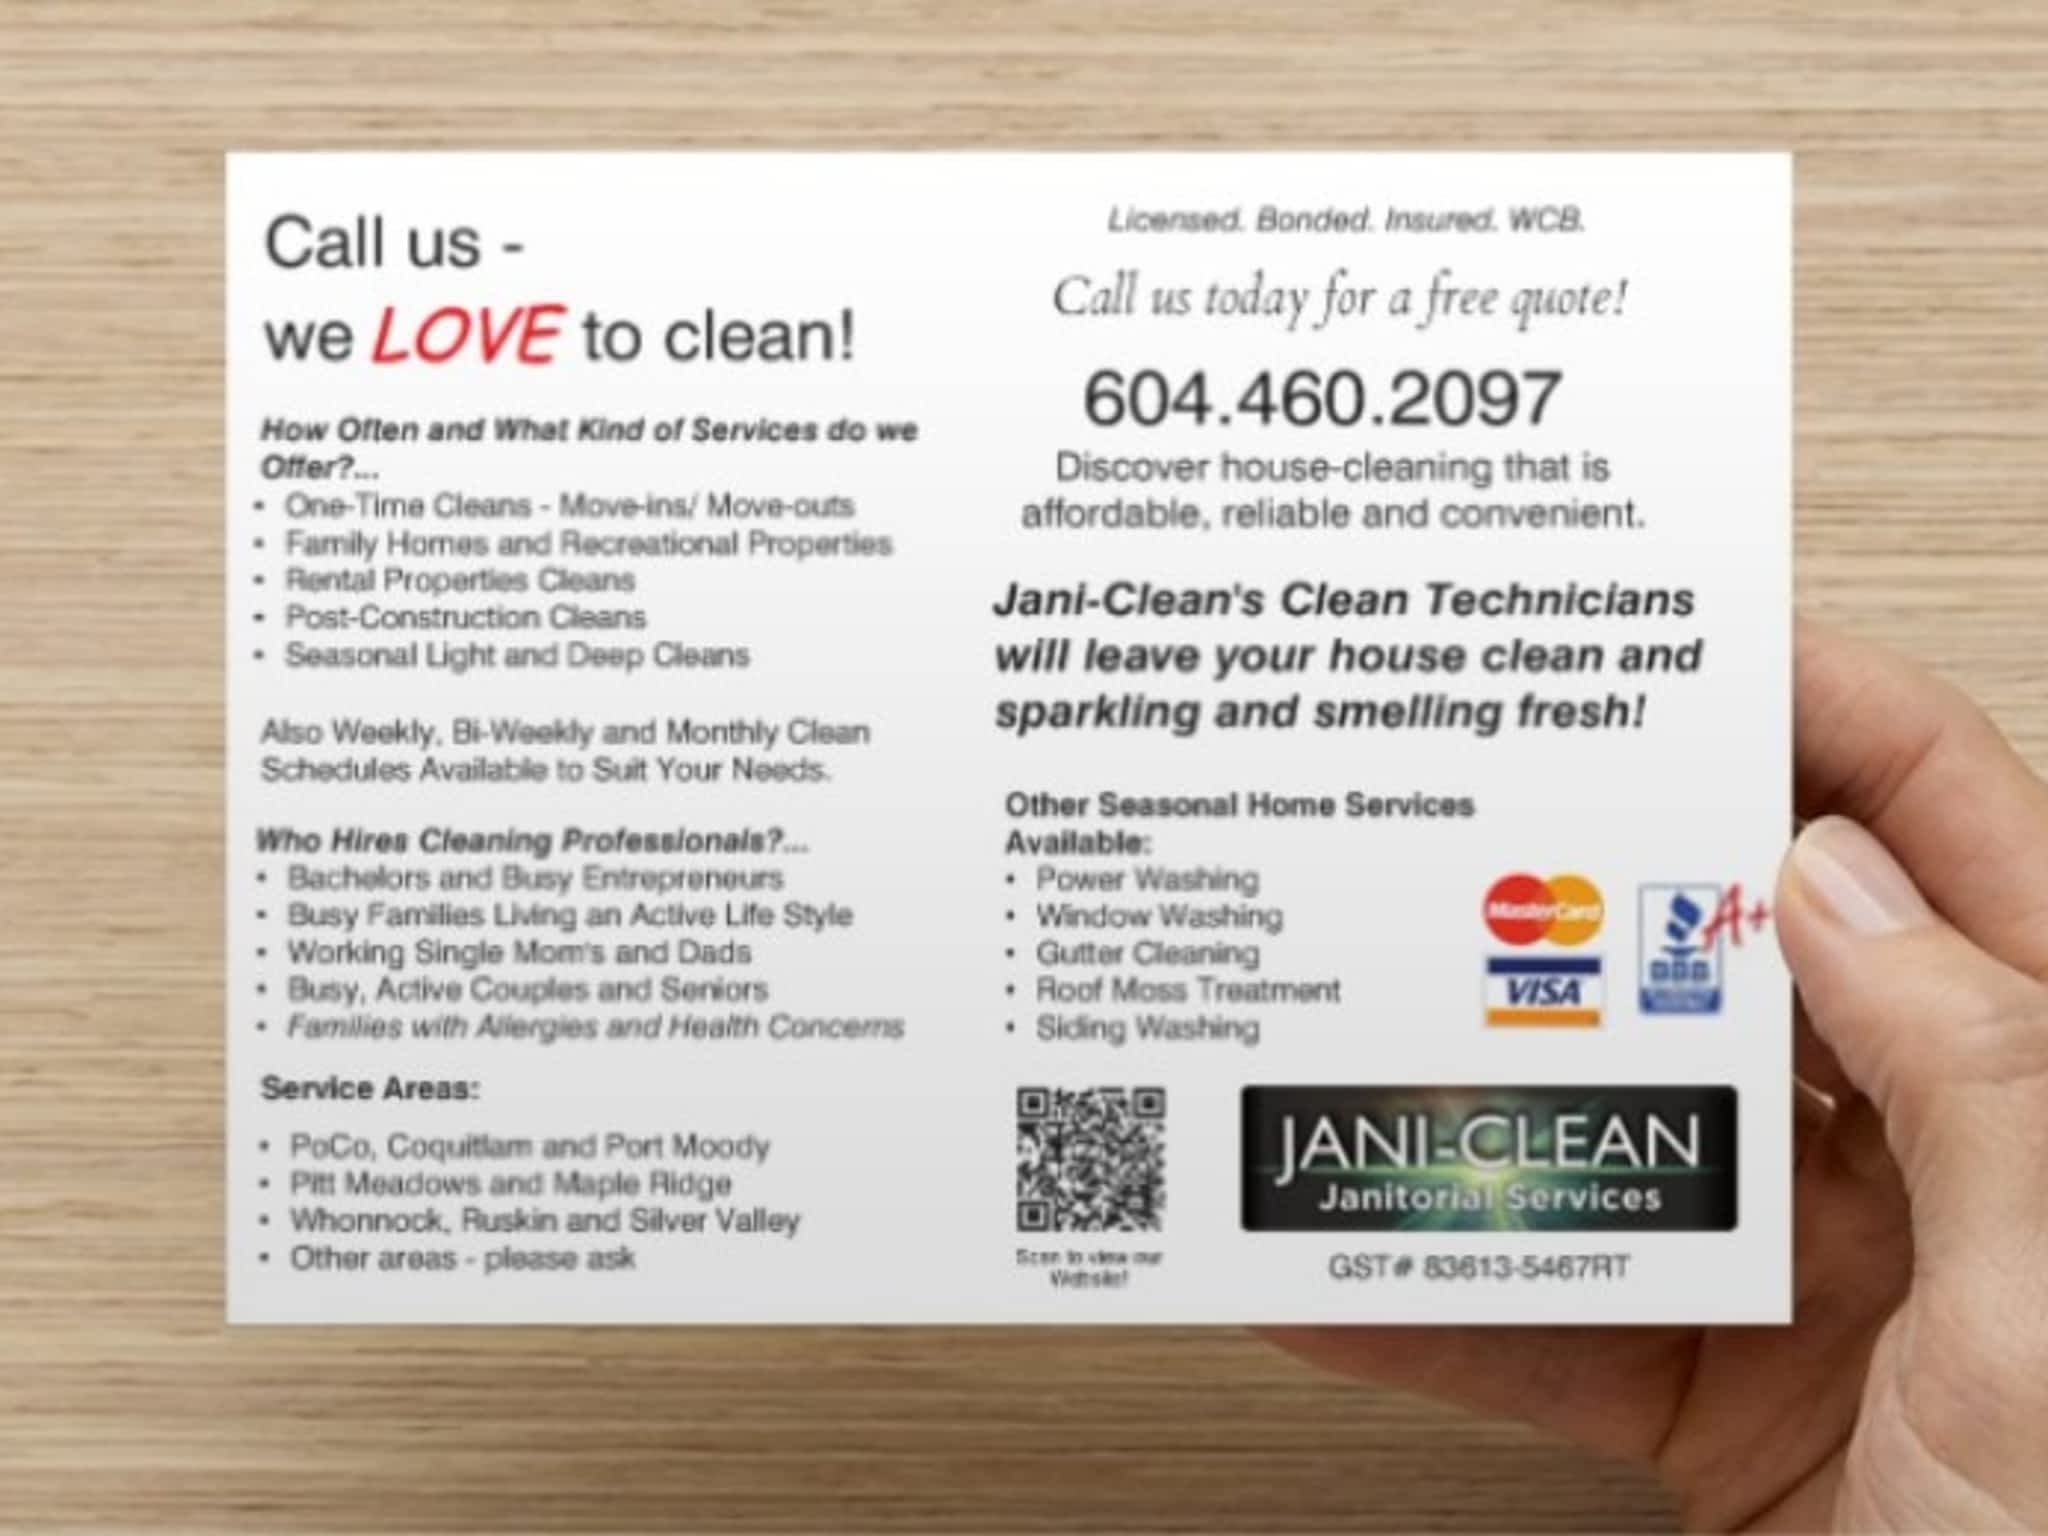 photo Jani-Clean Janitorial Services